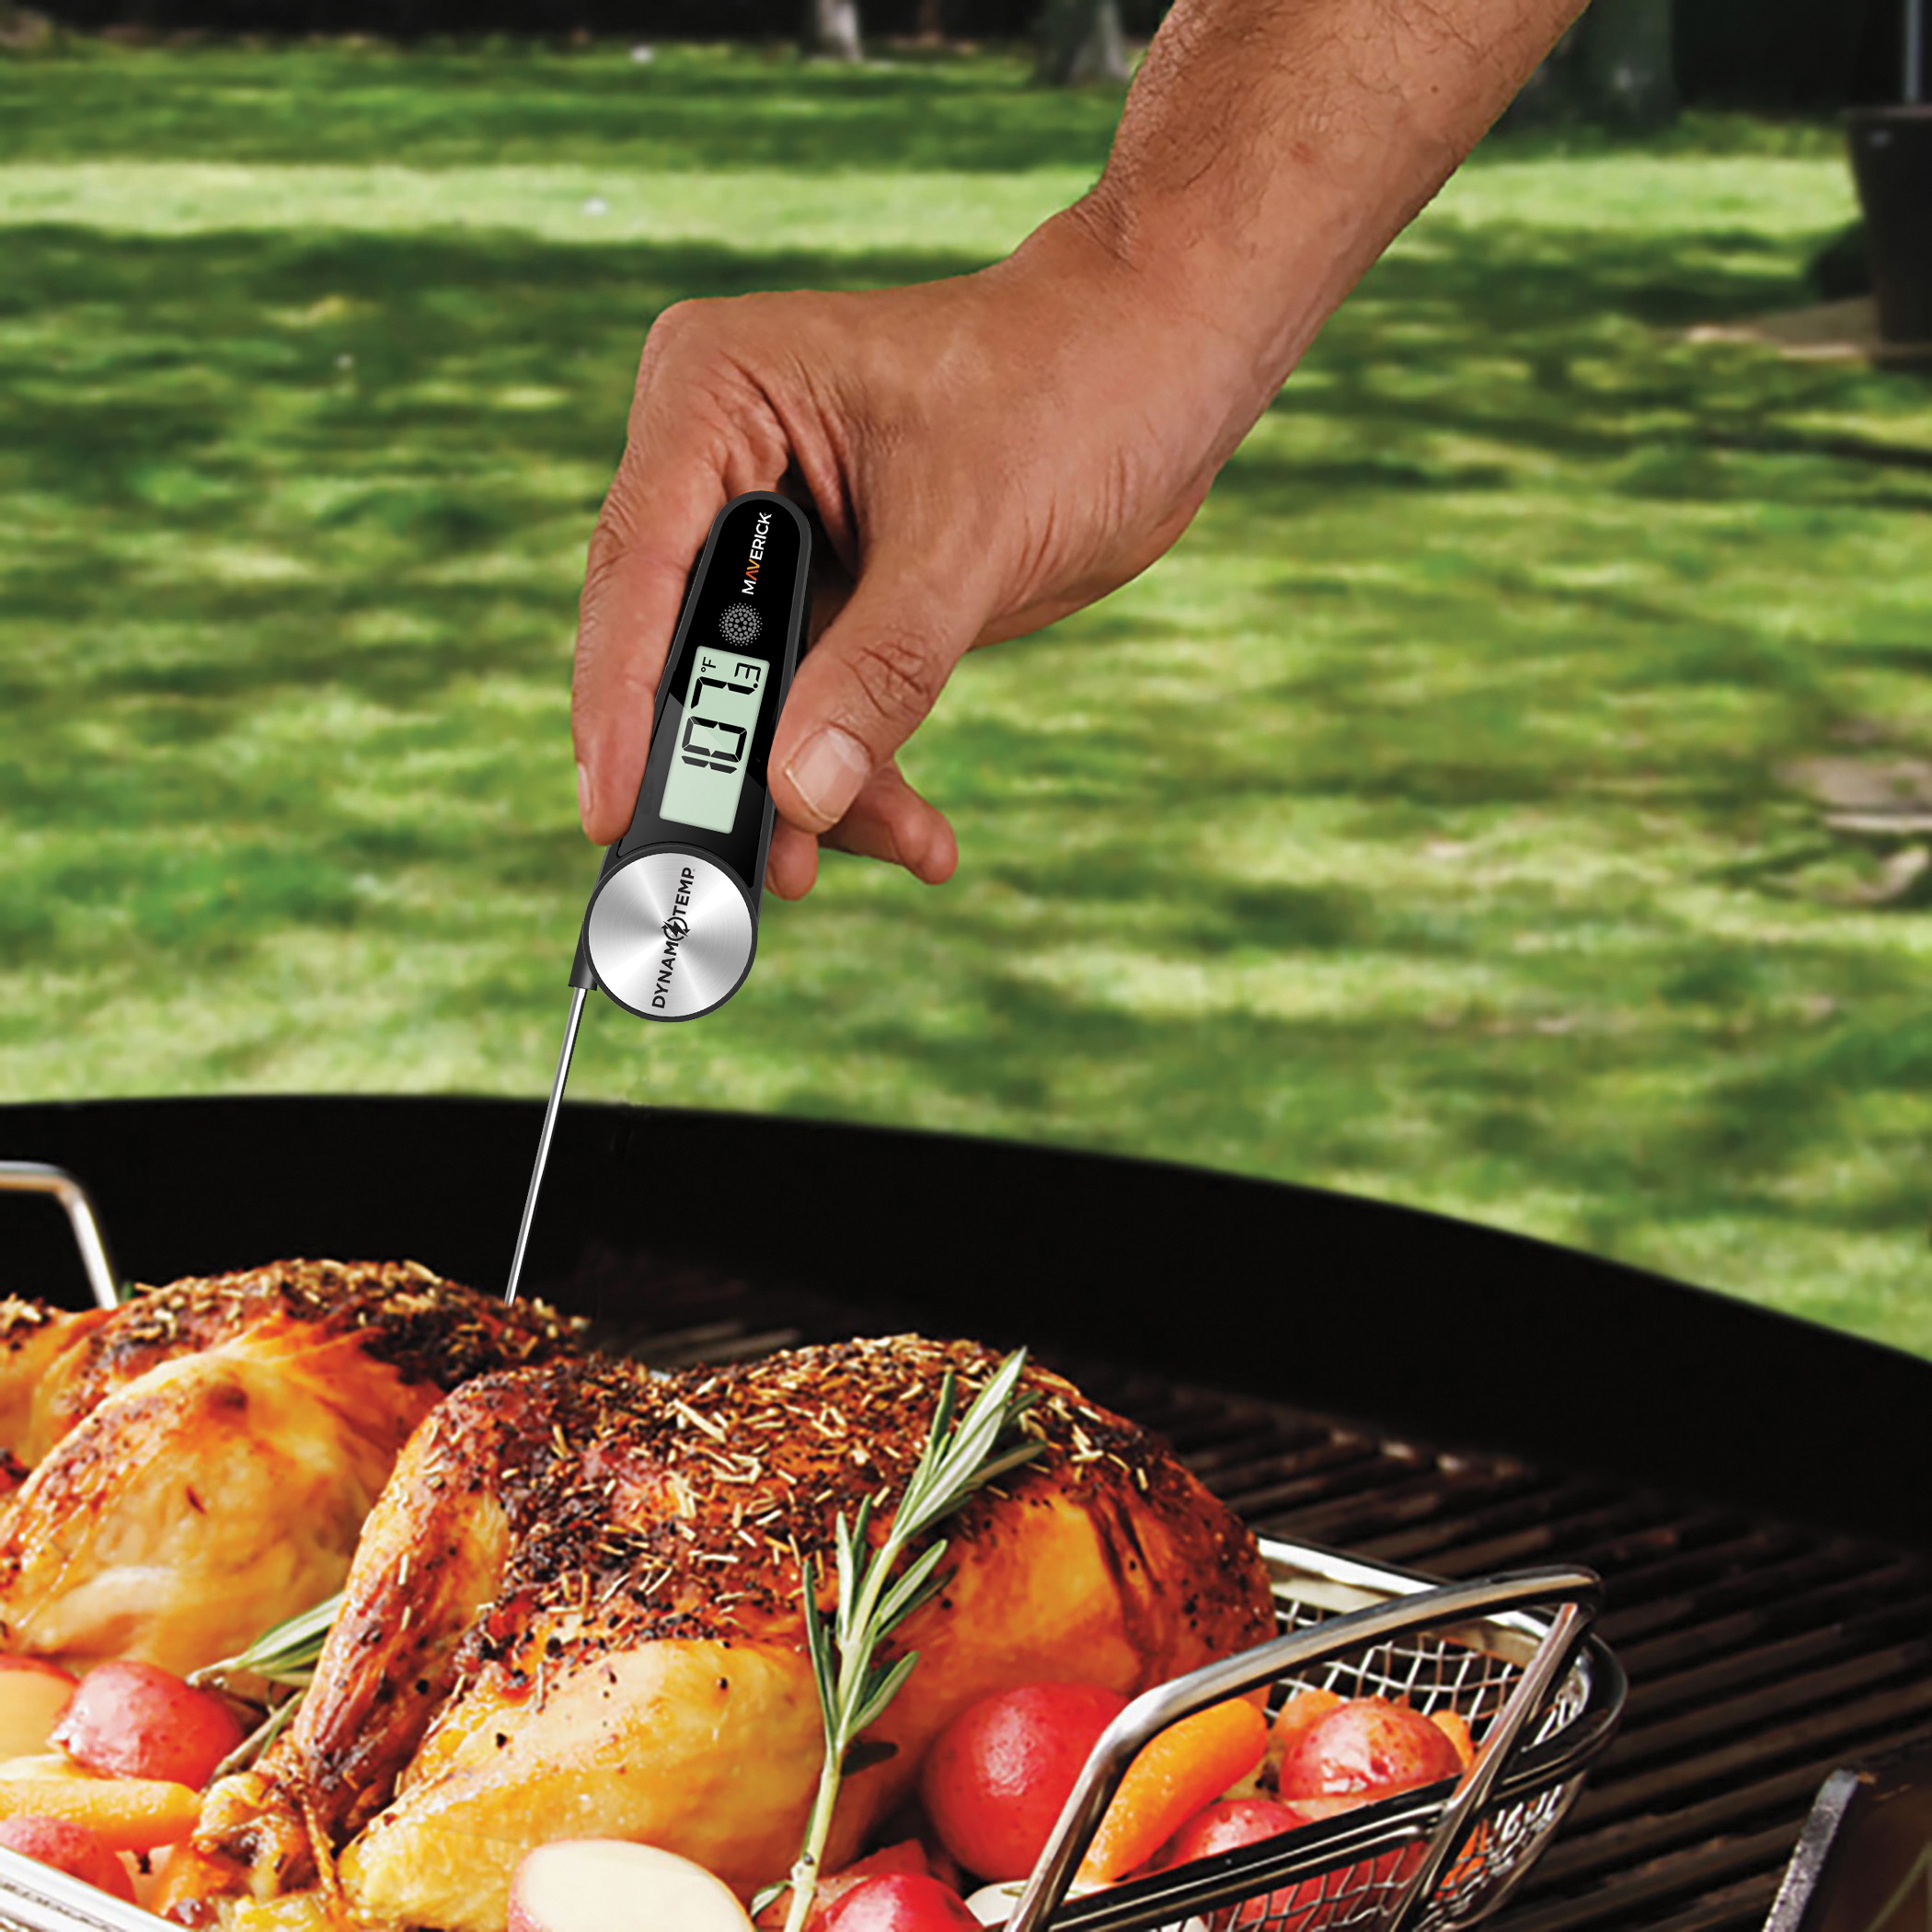 DOQAUS Digital Meat Thermometer, Instant Read Food Thermometer for Cooking  Review 